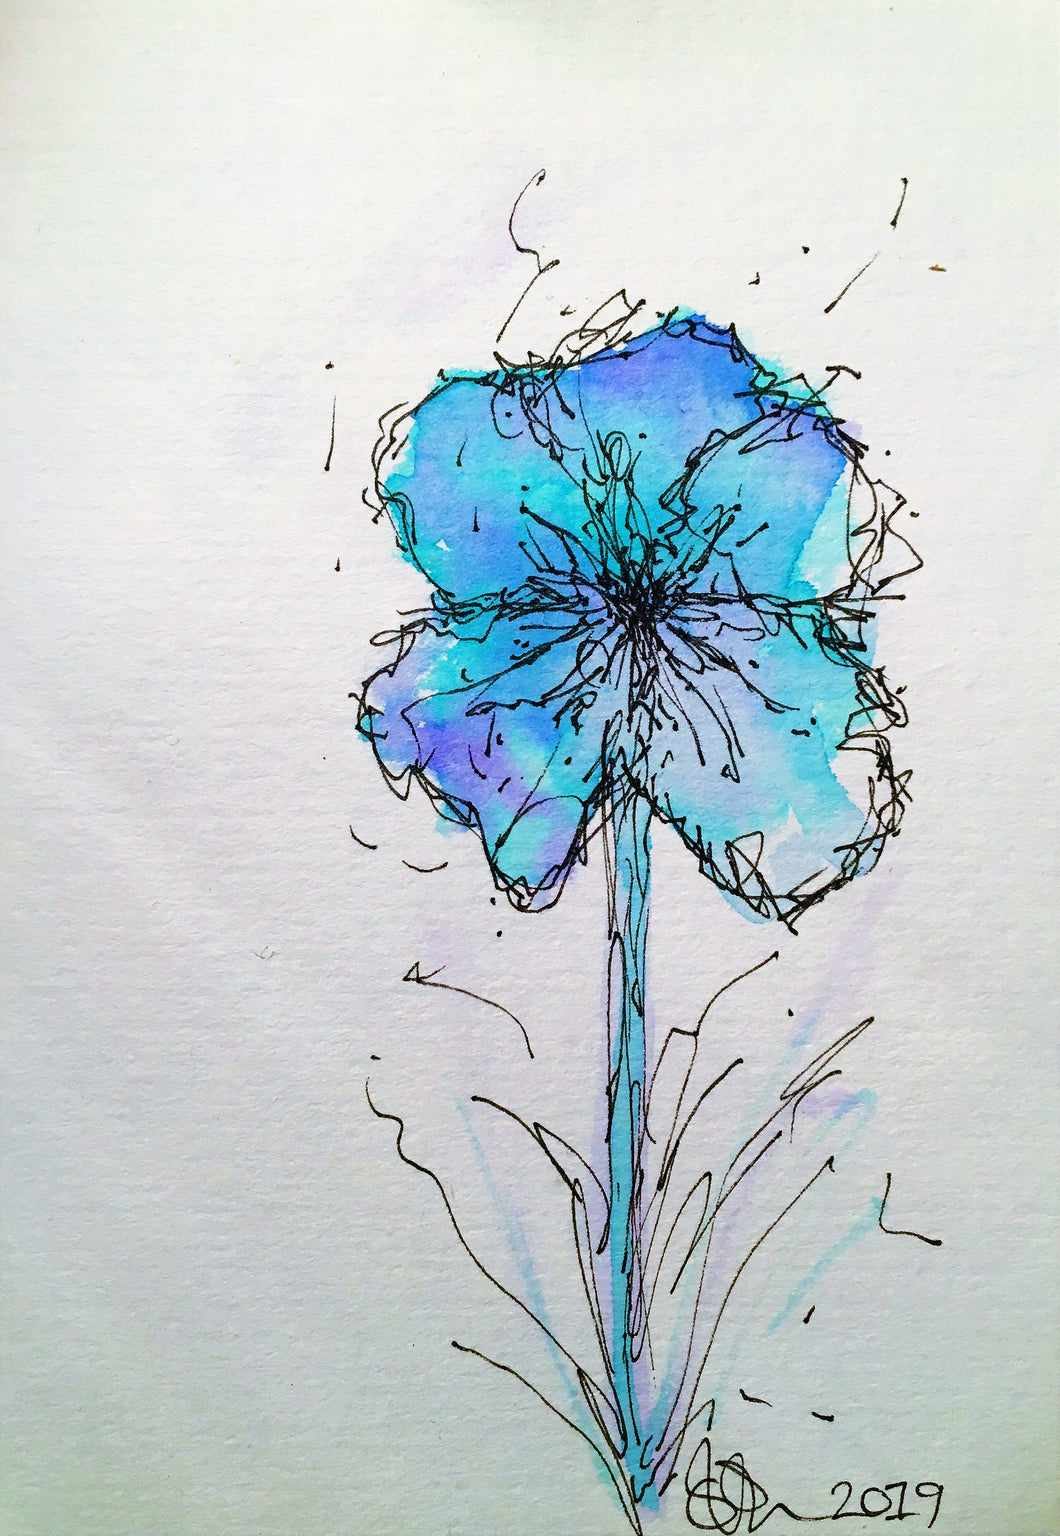 Handpainted Watercolour Greeting Card - Abstract Blue/Turquoise Flower Design - eDgE dEsiGn London